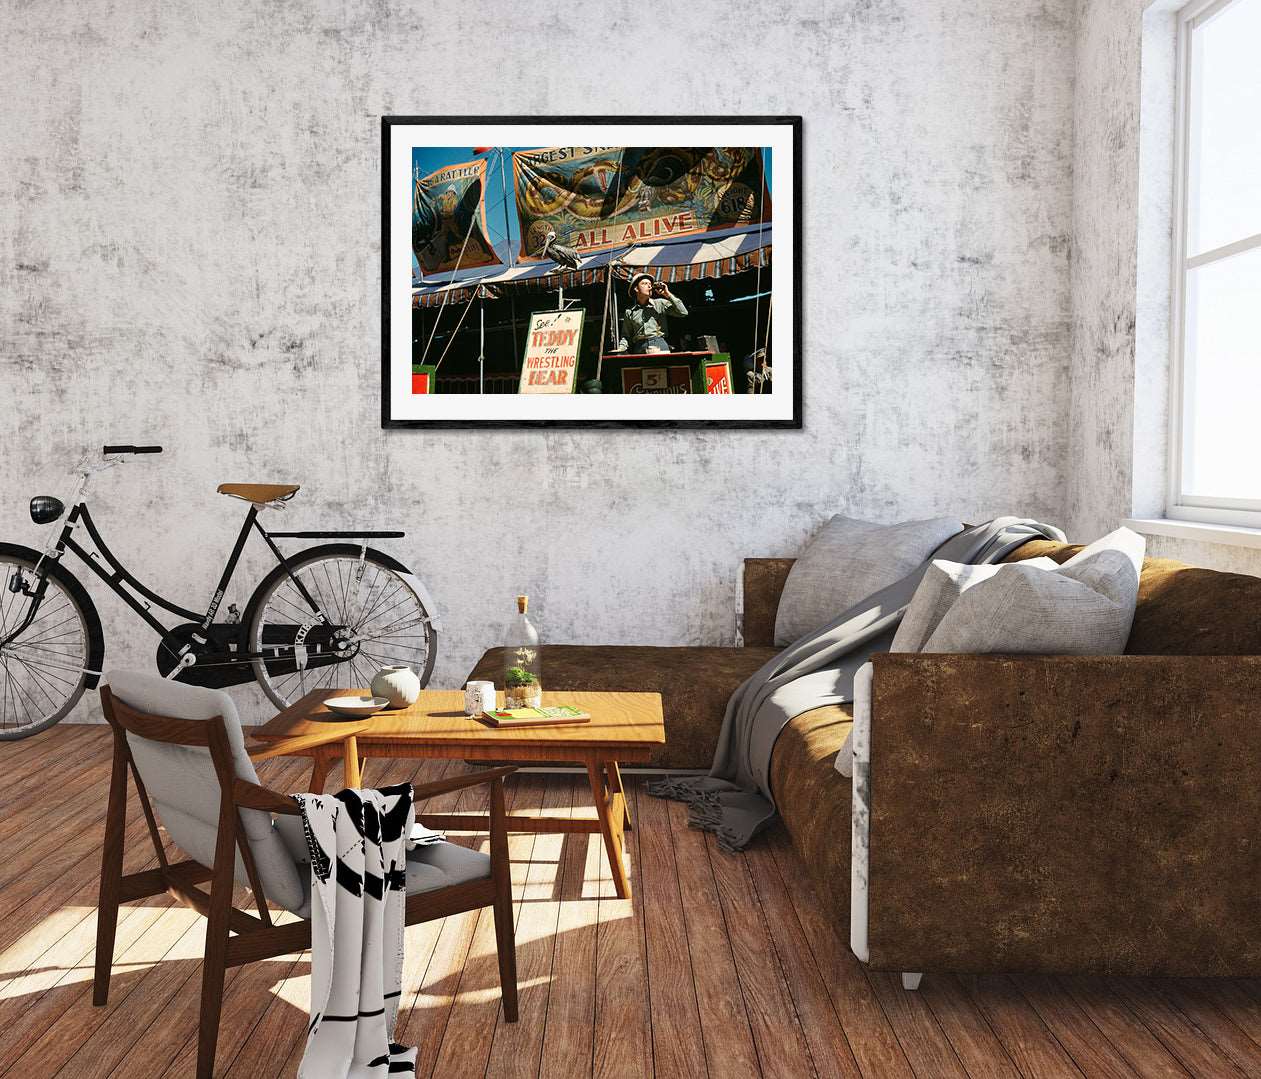 A rendering of a living room with a framed paper print on the wall, featuring a vintage color photograph